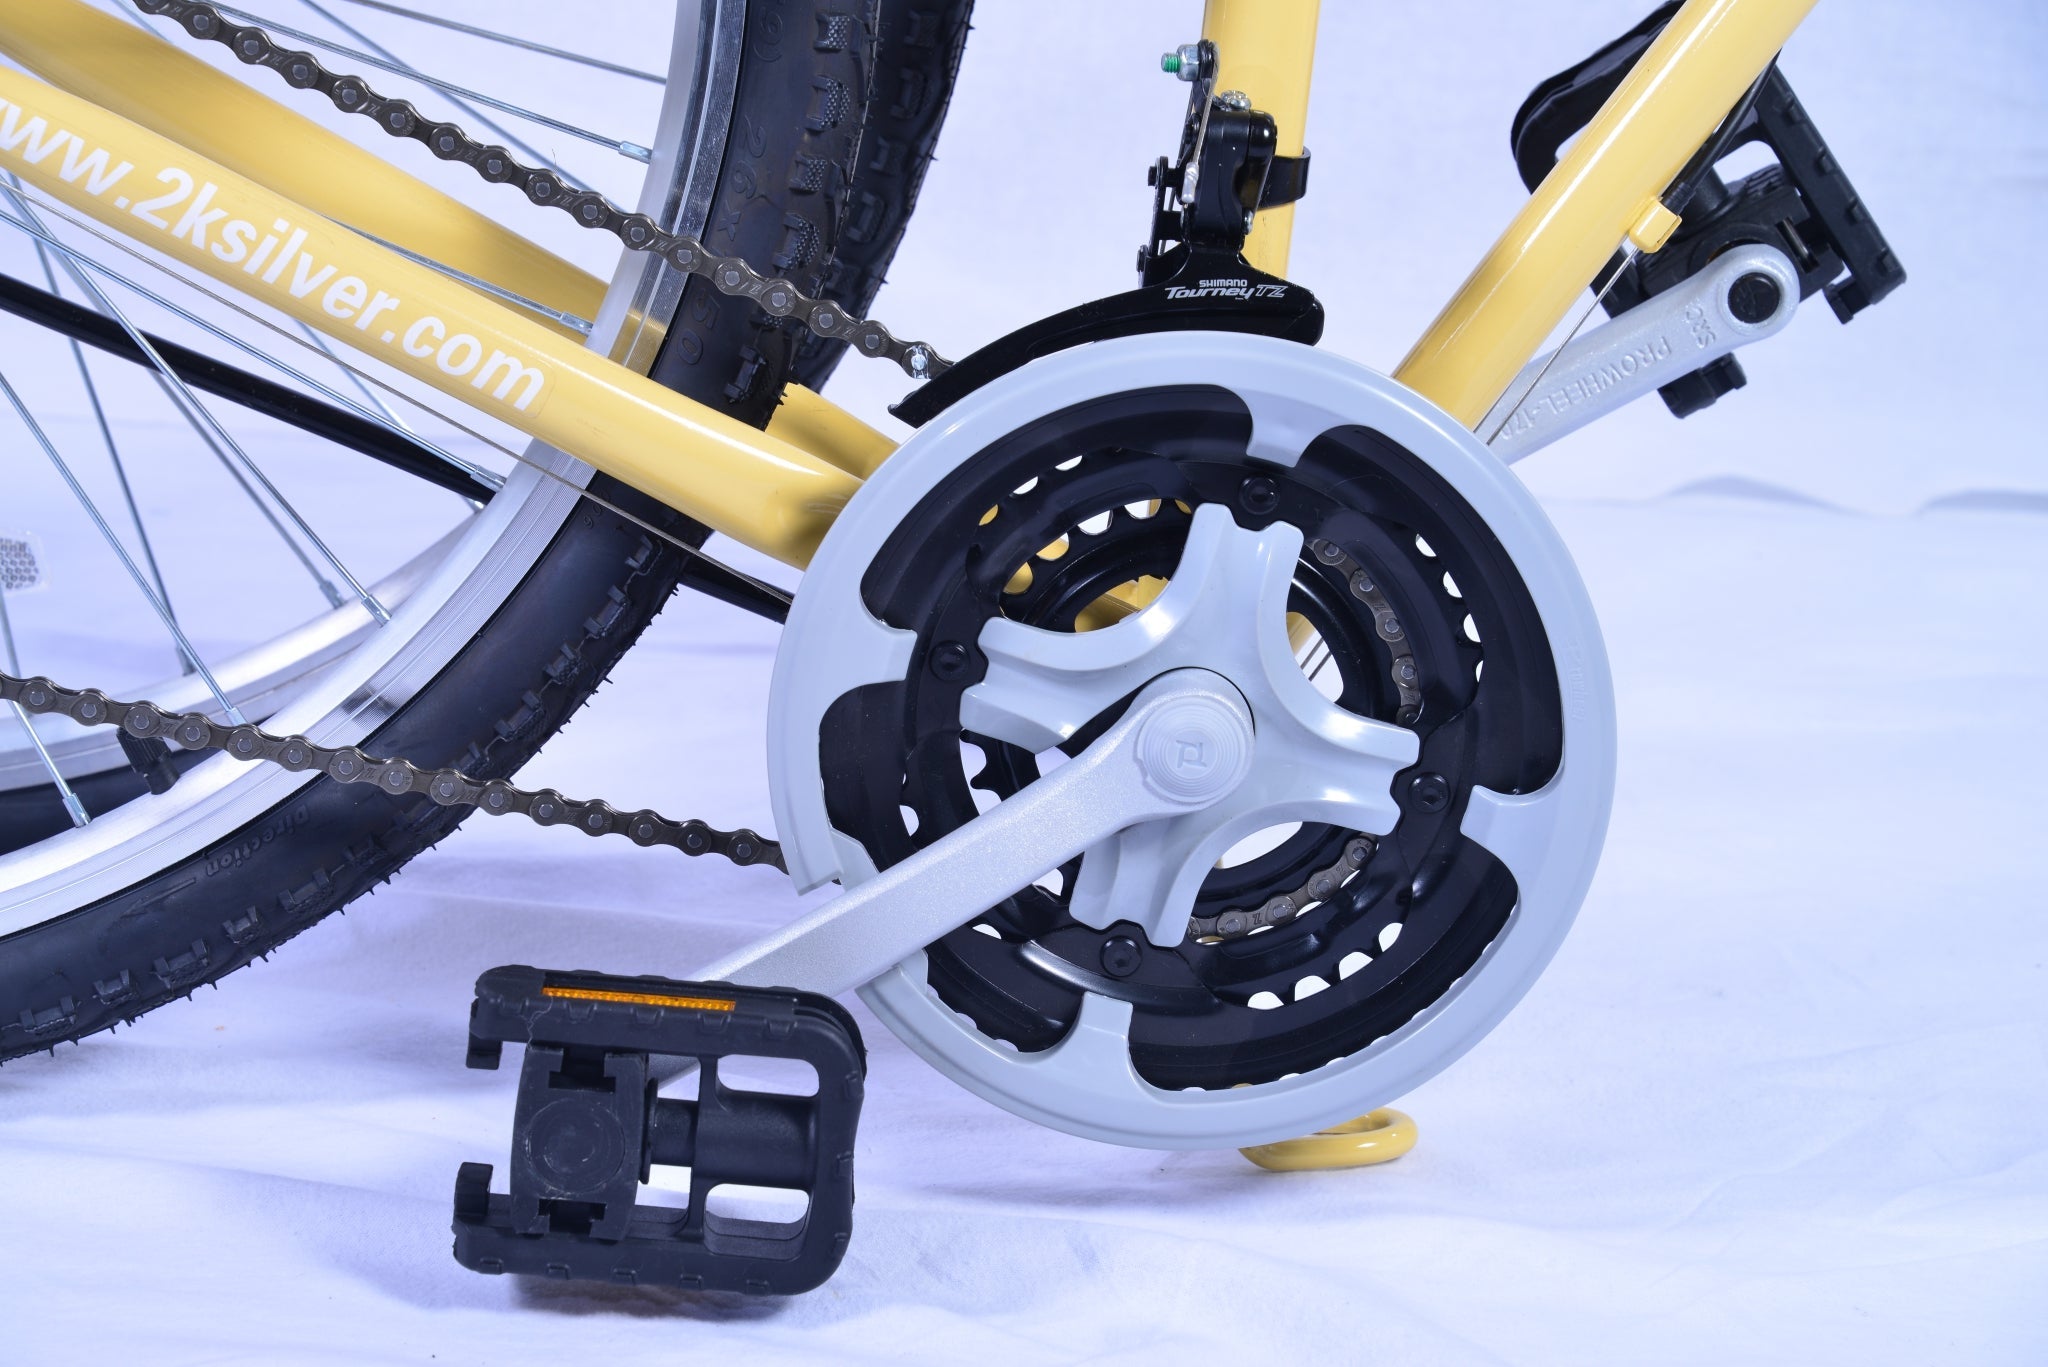 View of a yellow colored bicycle's pedal, crank arm, front derailleur, and chain rings.